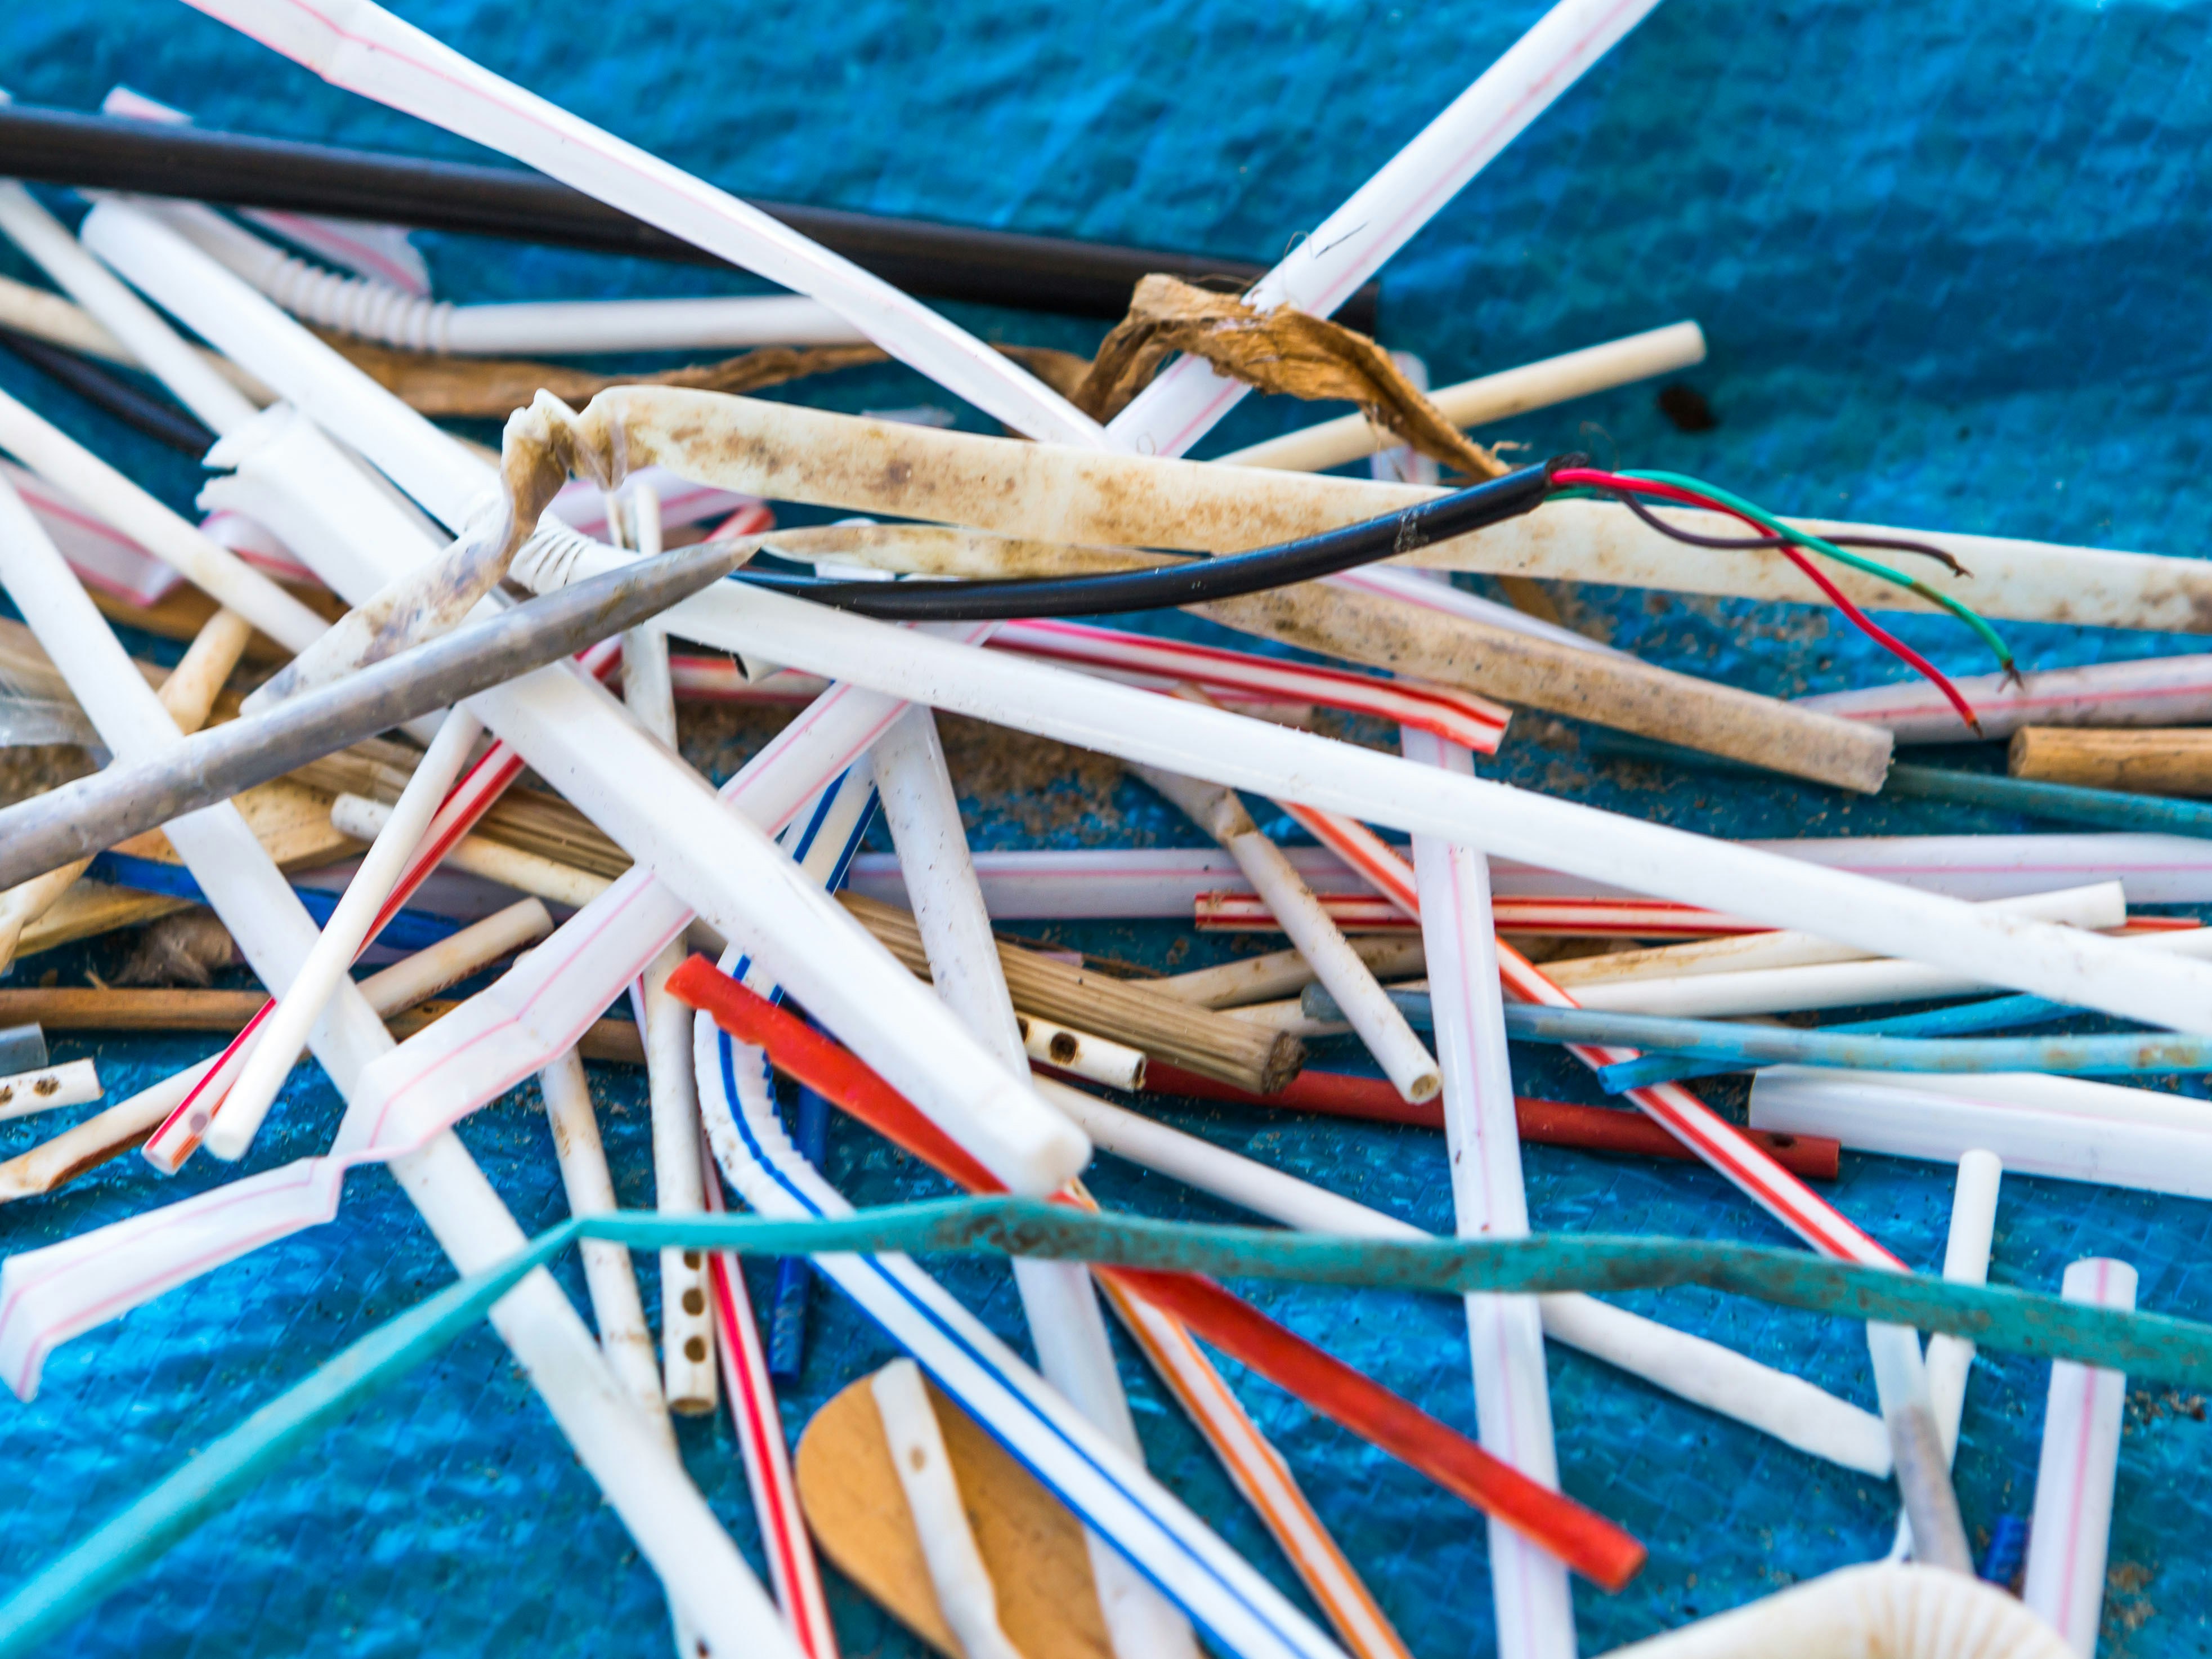 <p>Cheap and accessible single-use plastic straws play an important role and are considered a necessity for people with disability. [Source:Shutterstock]</p>
